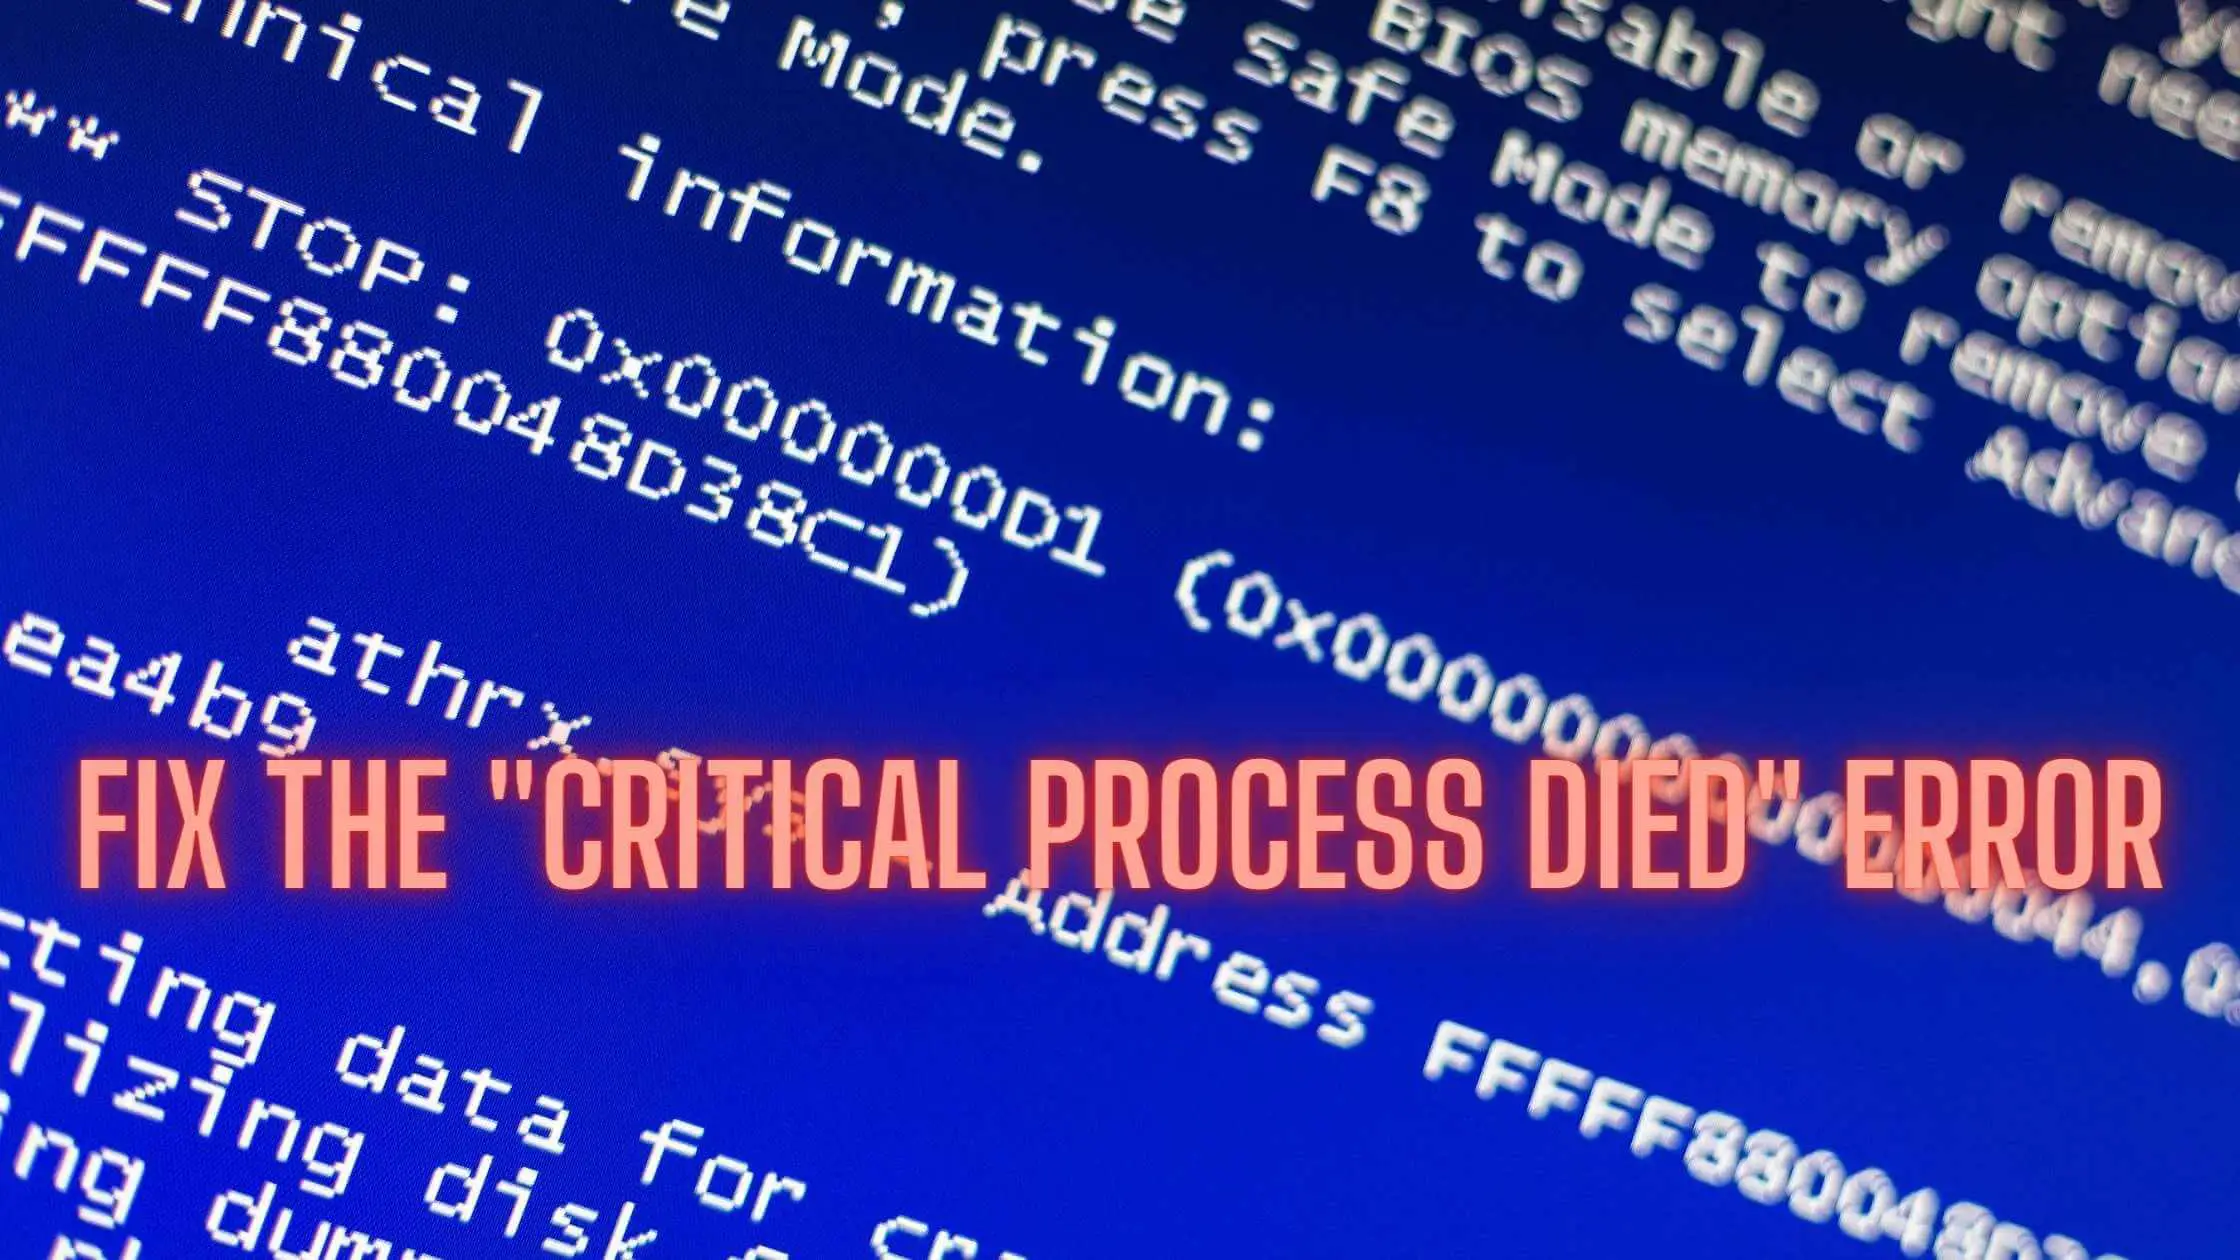 Critical Process Died Error In Windows 10 : Simple Fixes